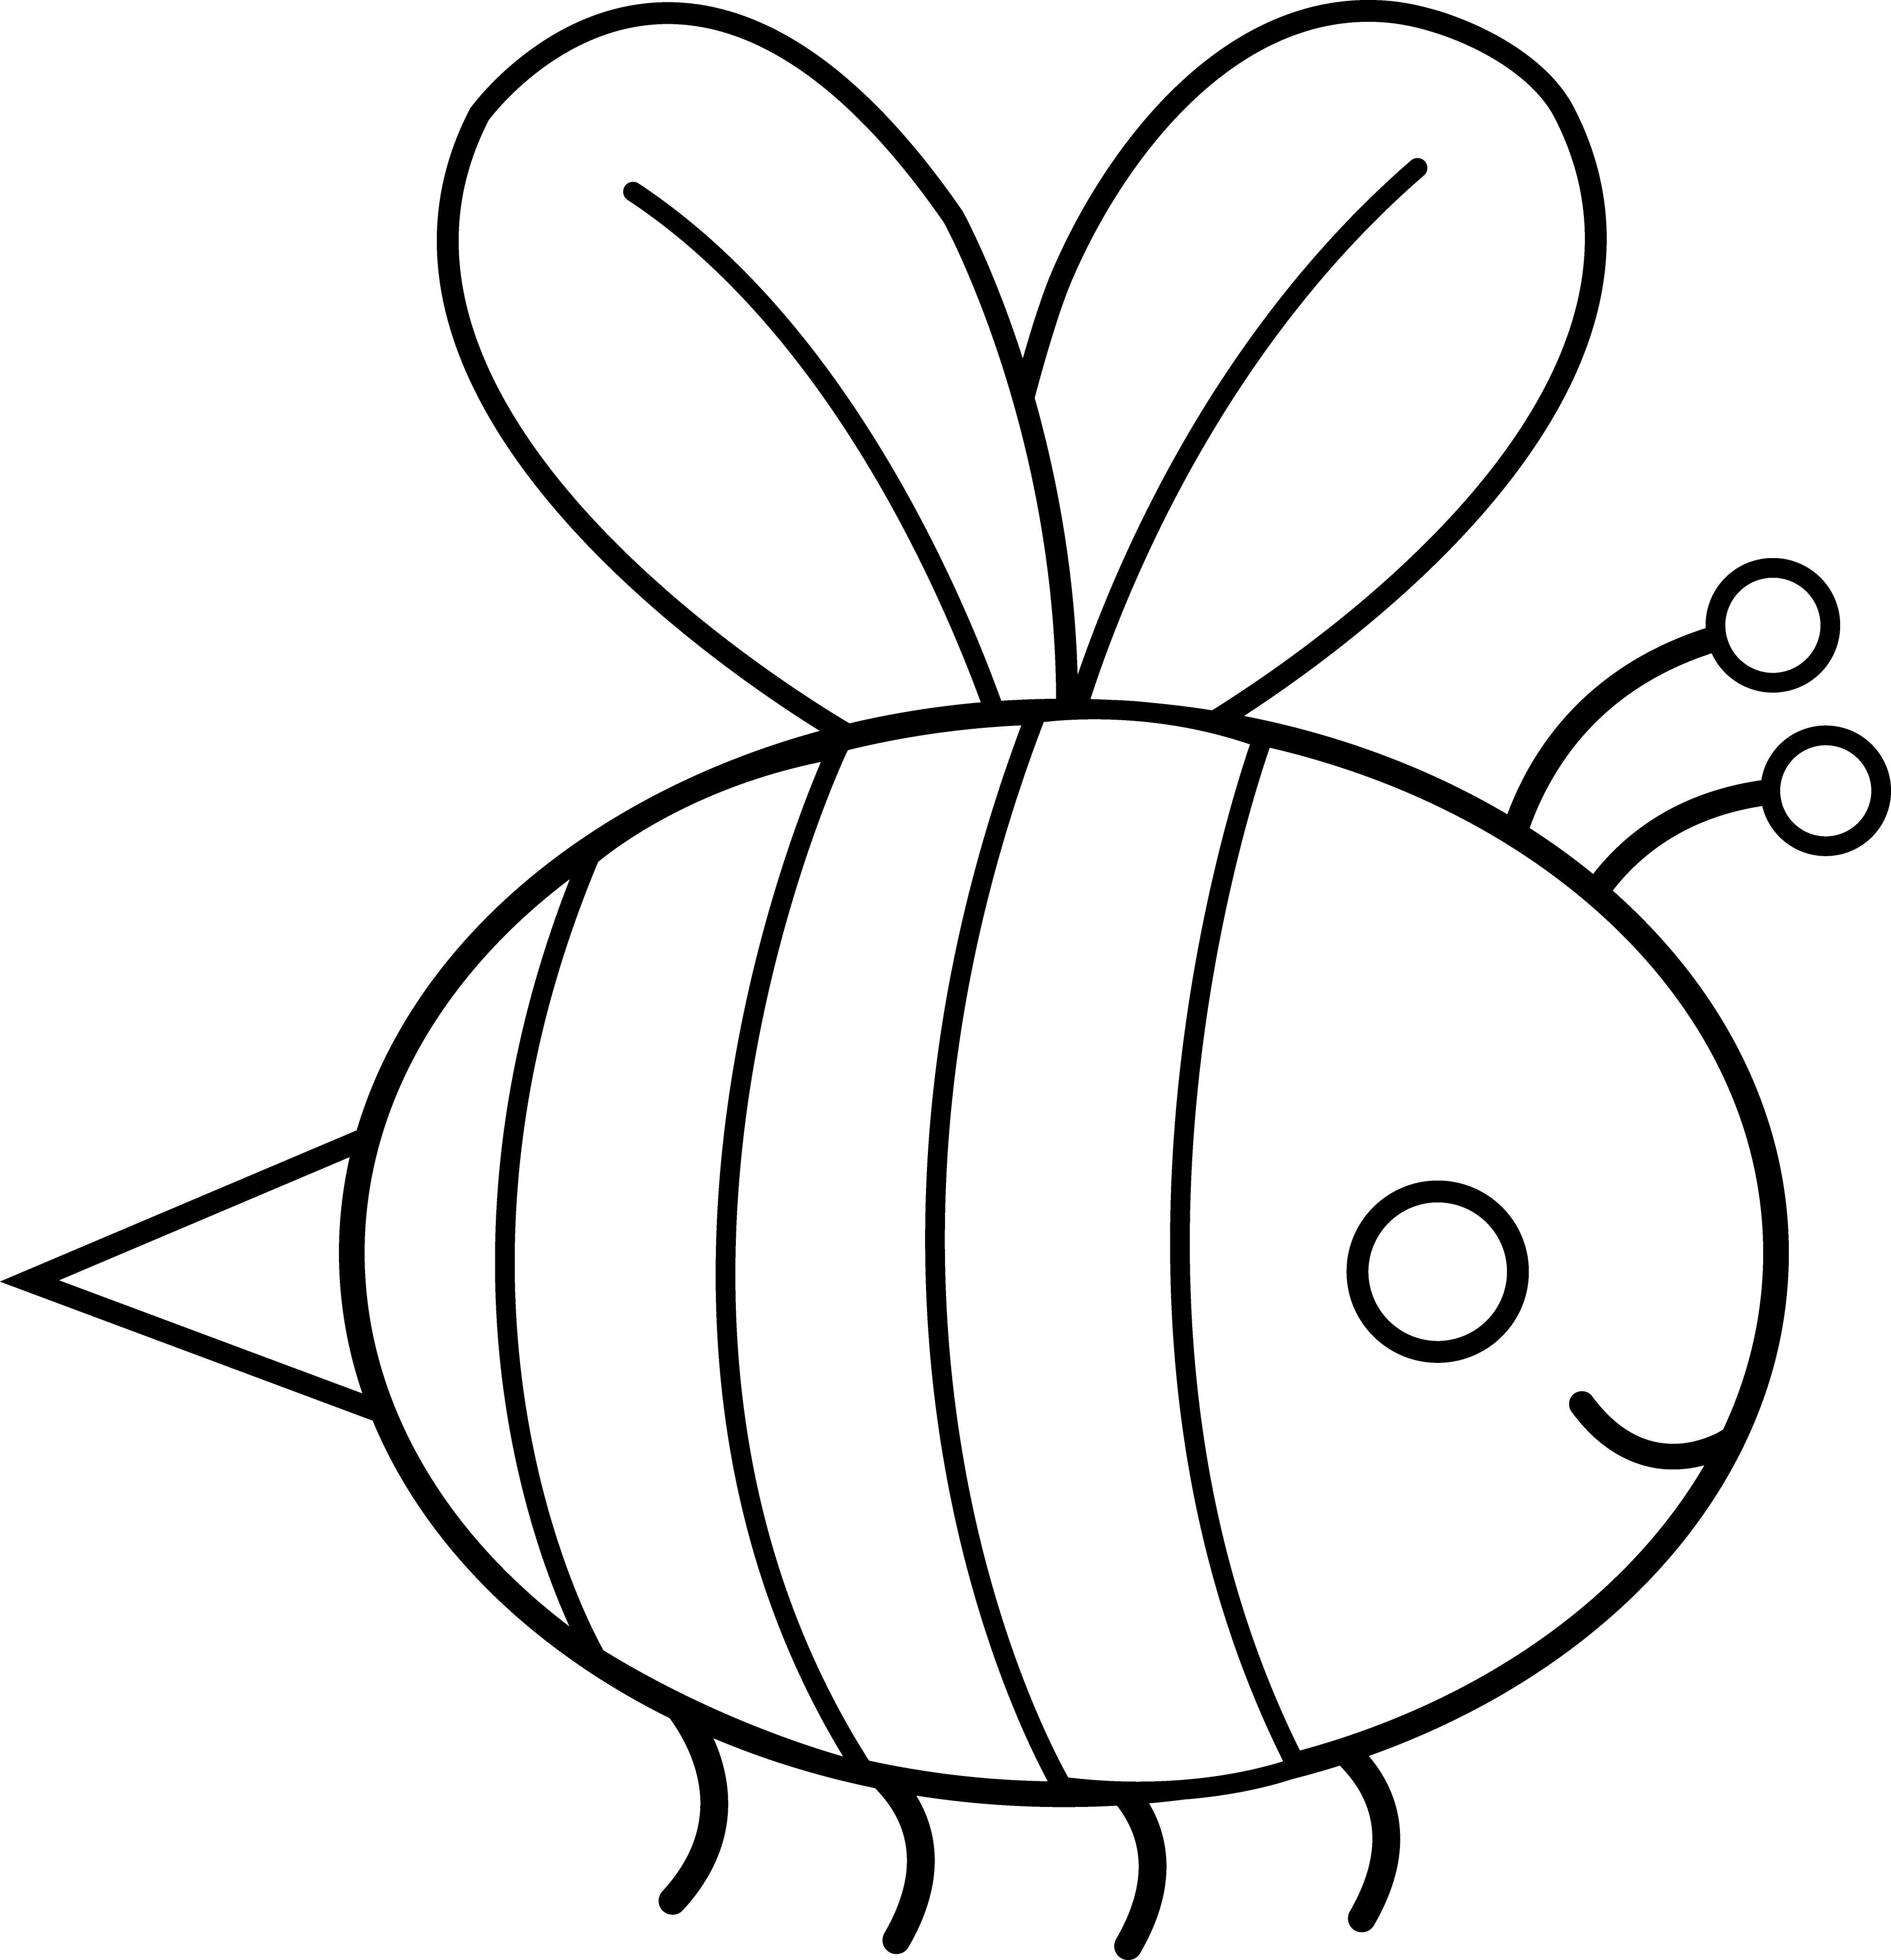 Free Bumble Bee Outline, Download Free Bumble Bee Outline png images